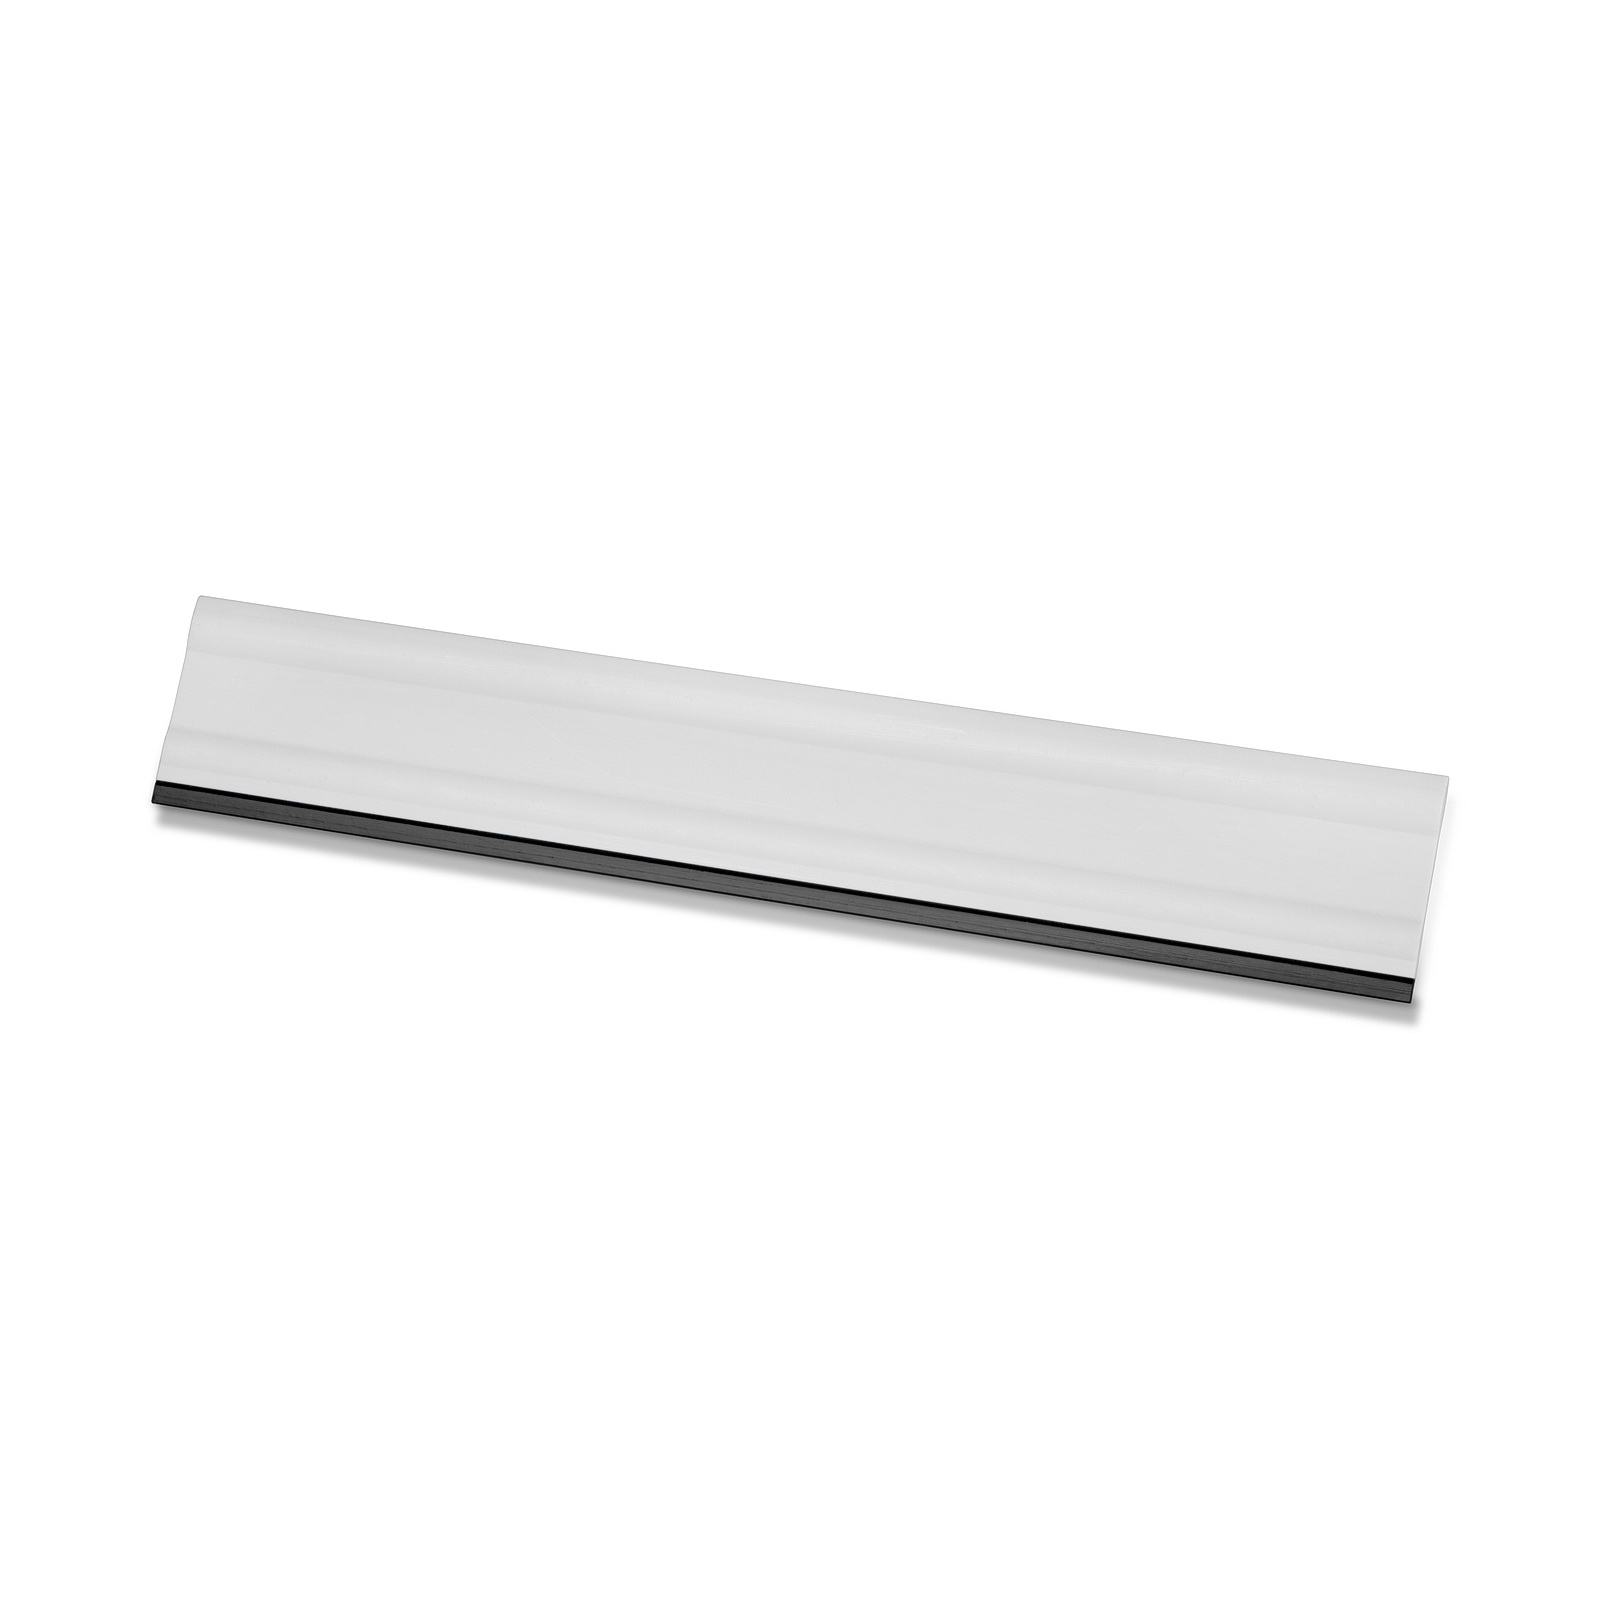 12'' x 2'' White Squeegee, with Black Soft Rubber Edge for Vinyl and Film Application